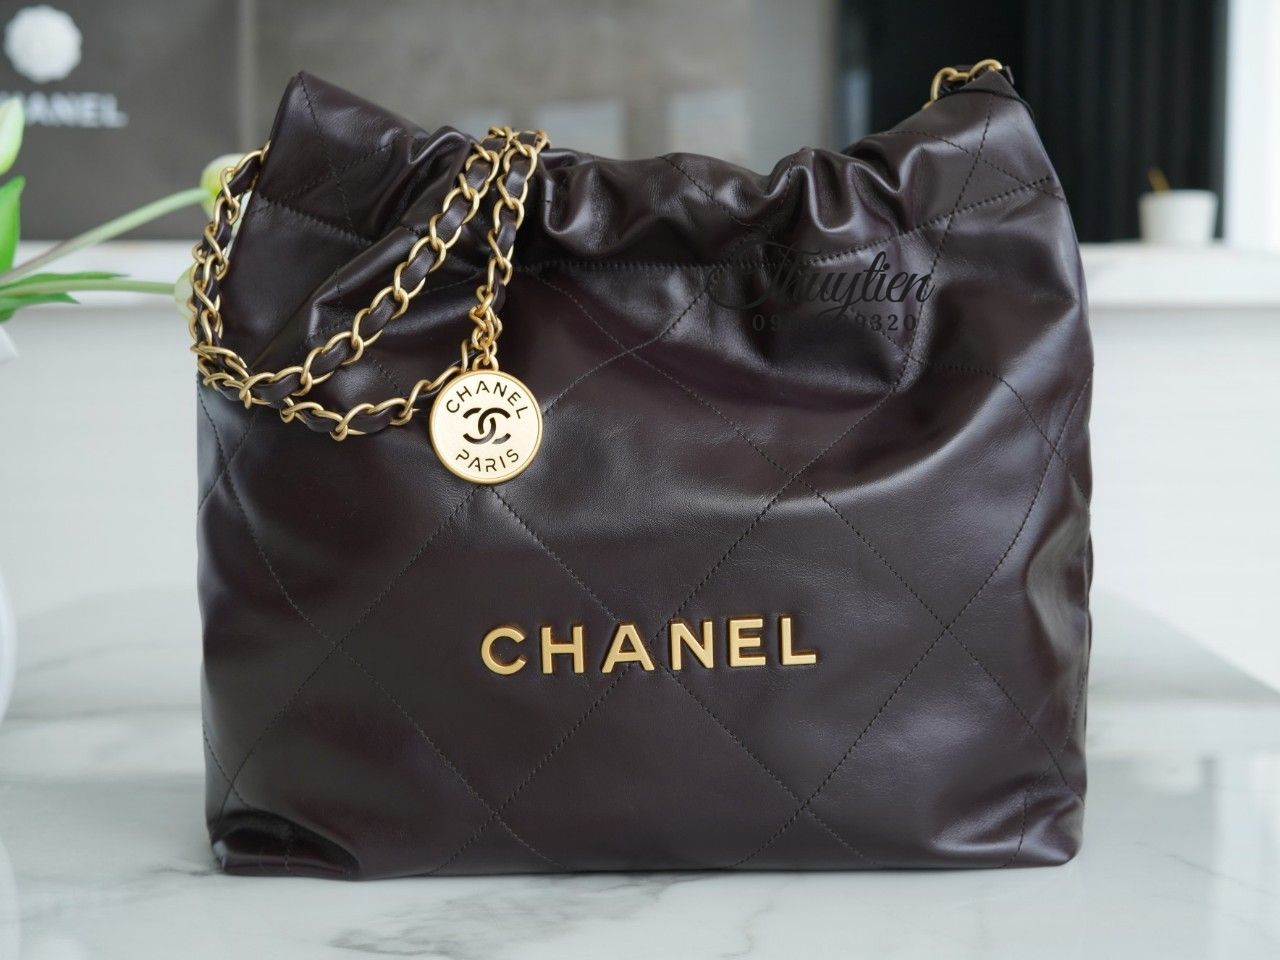 Chanel VIP Tote for Sale in North Hollywood CA  OfferUp